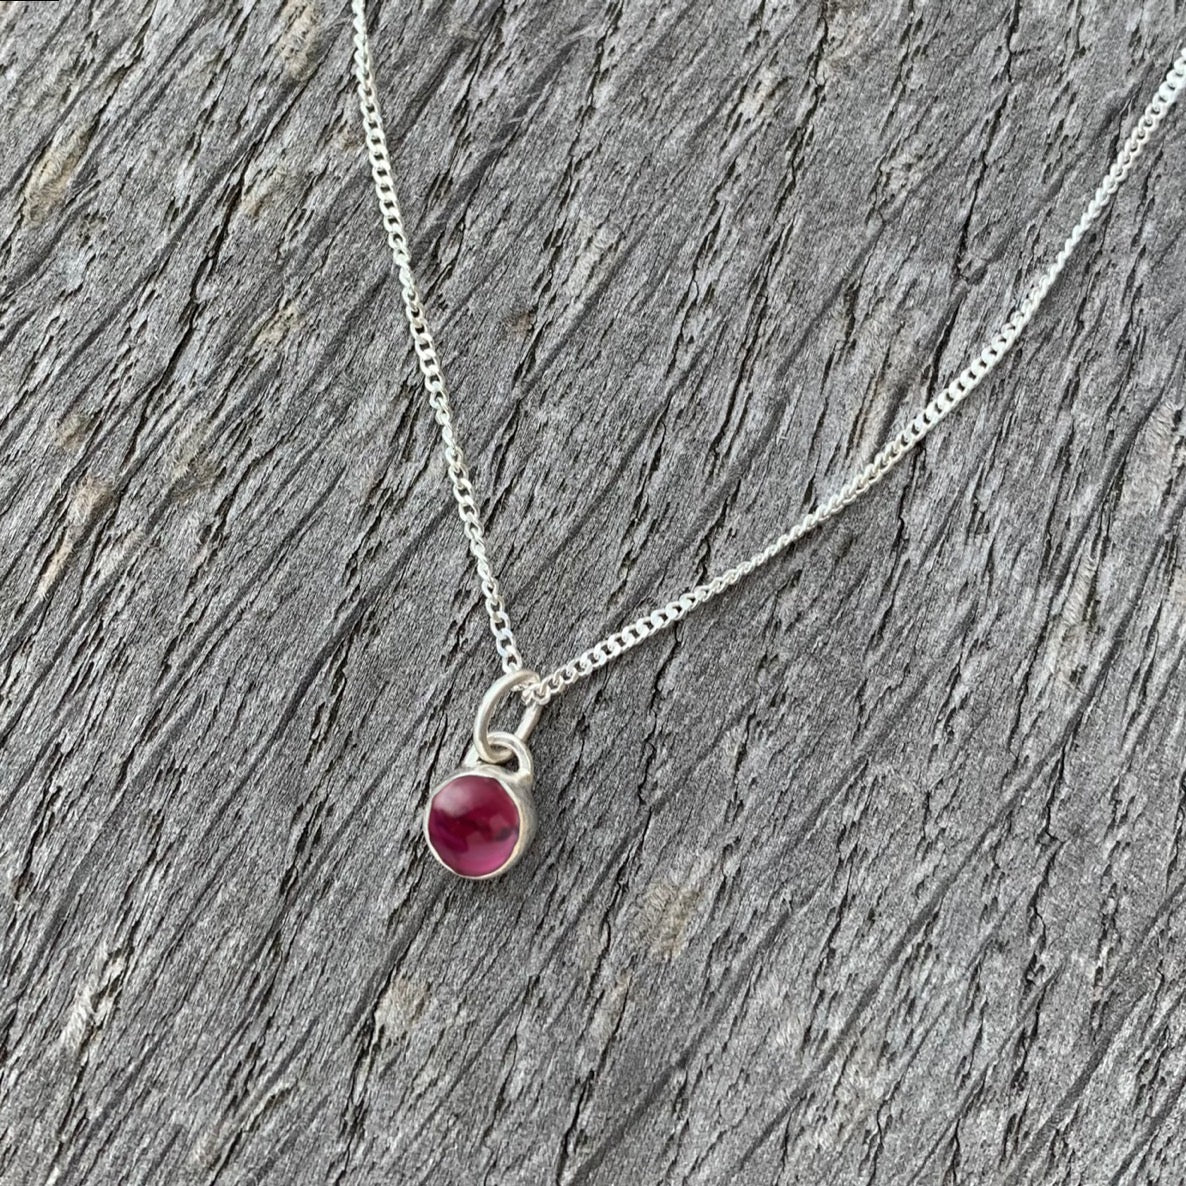 A garnet stone set in silver on a sterling silver chain.